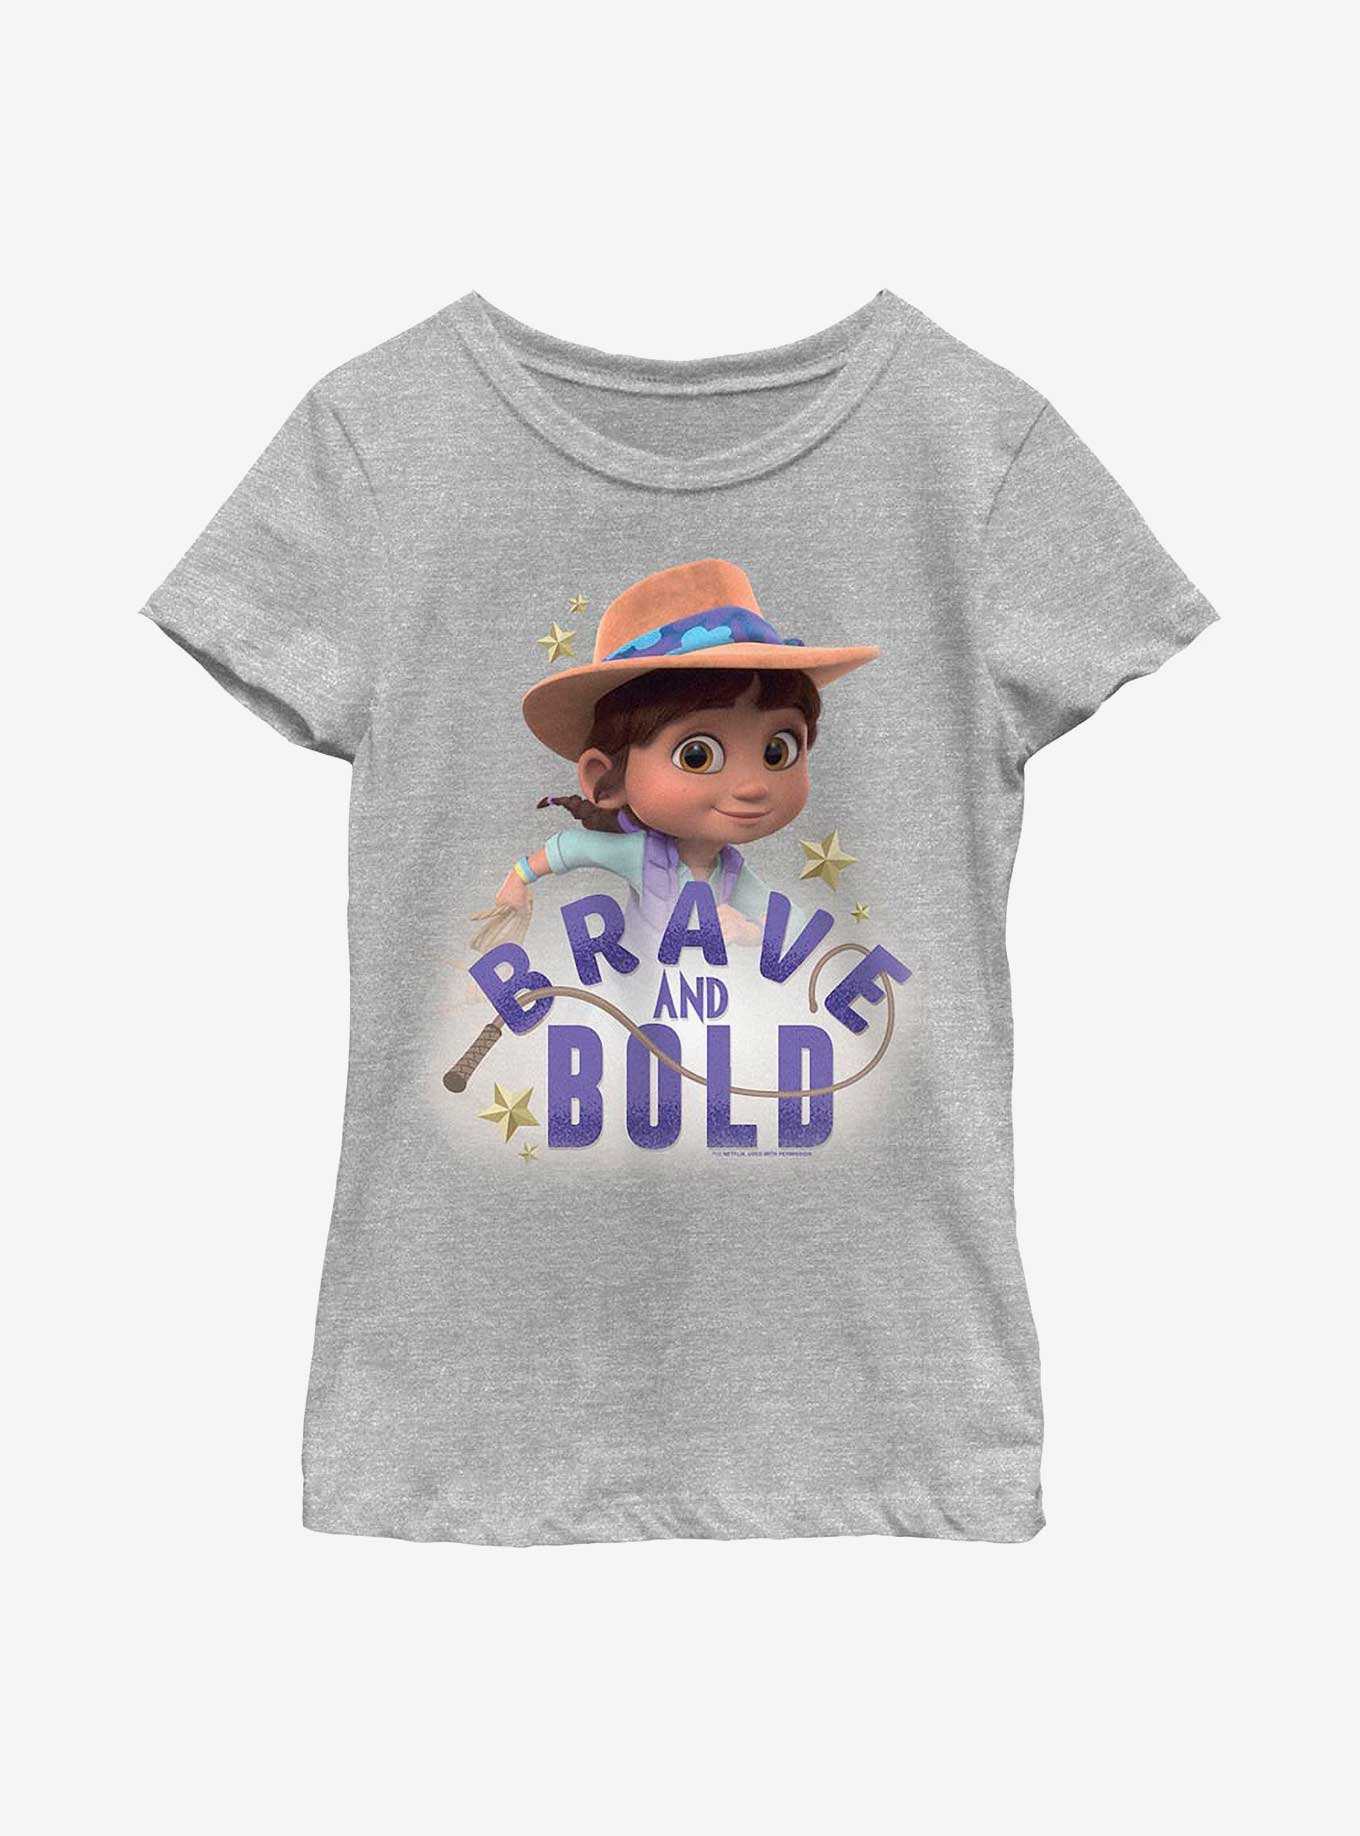 Ridley Jones Brave And Bold Stars Youth Girls T-Shirt, , hi-res